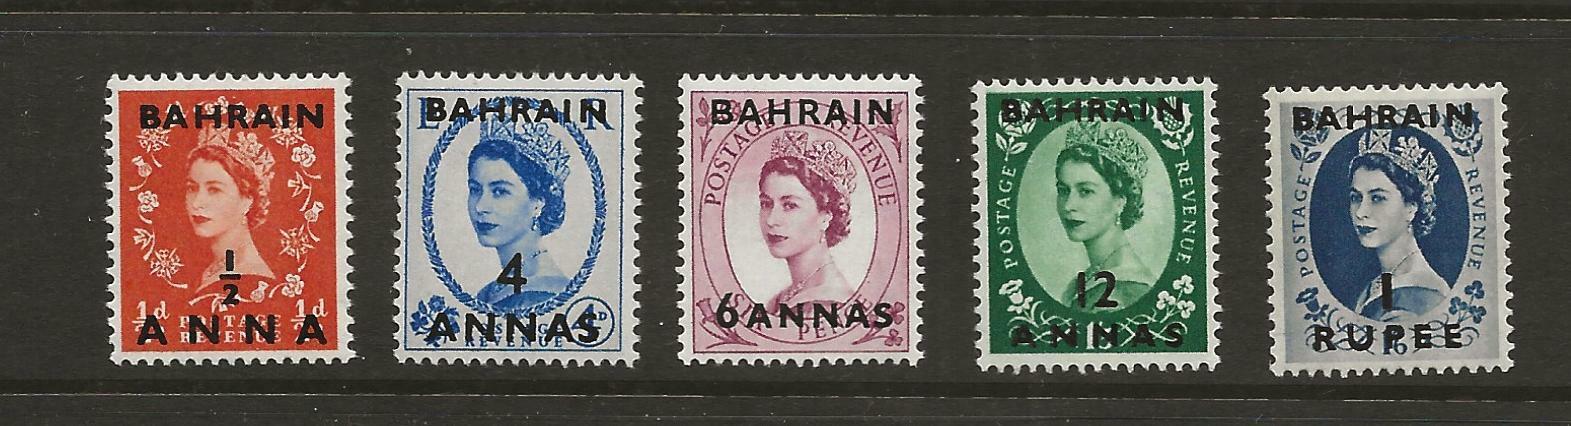 1956-57 Bahrain surcharged set  SG97-101 Unmounted Mint